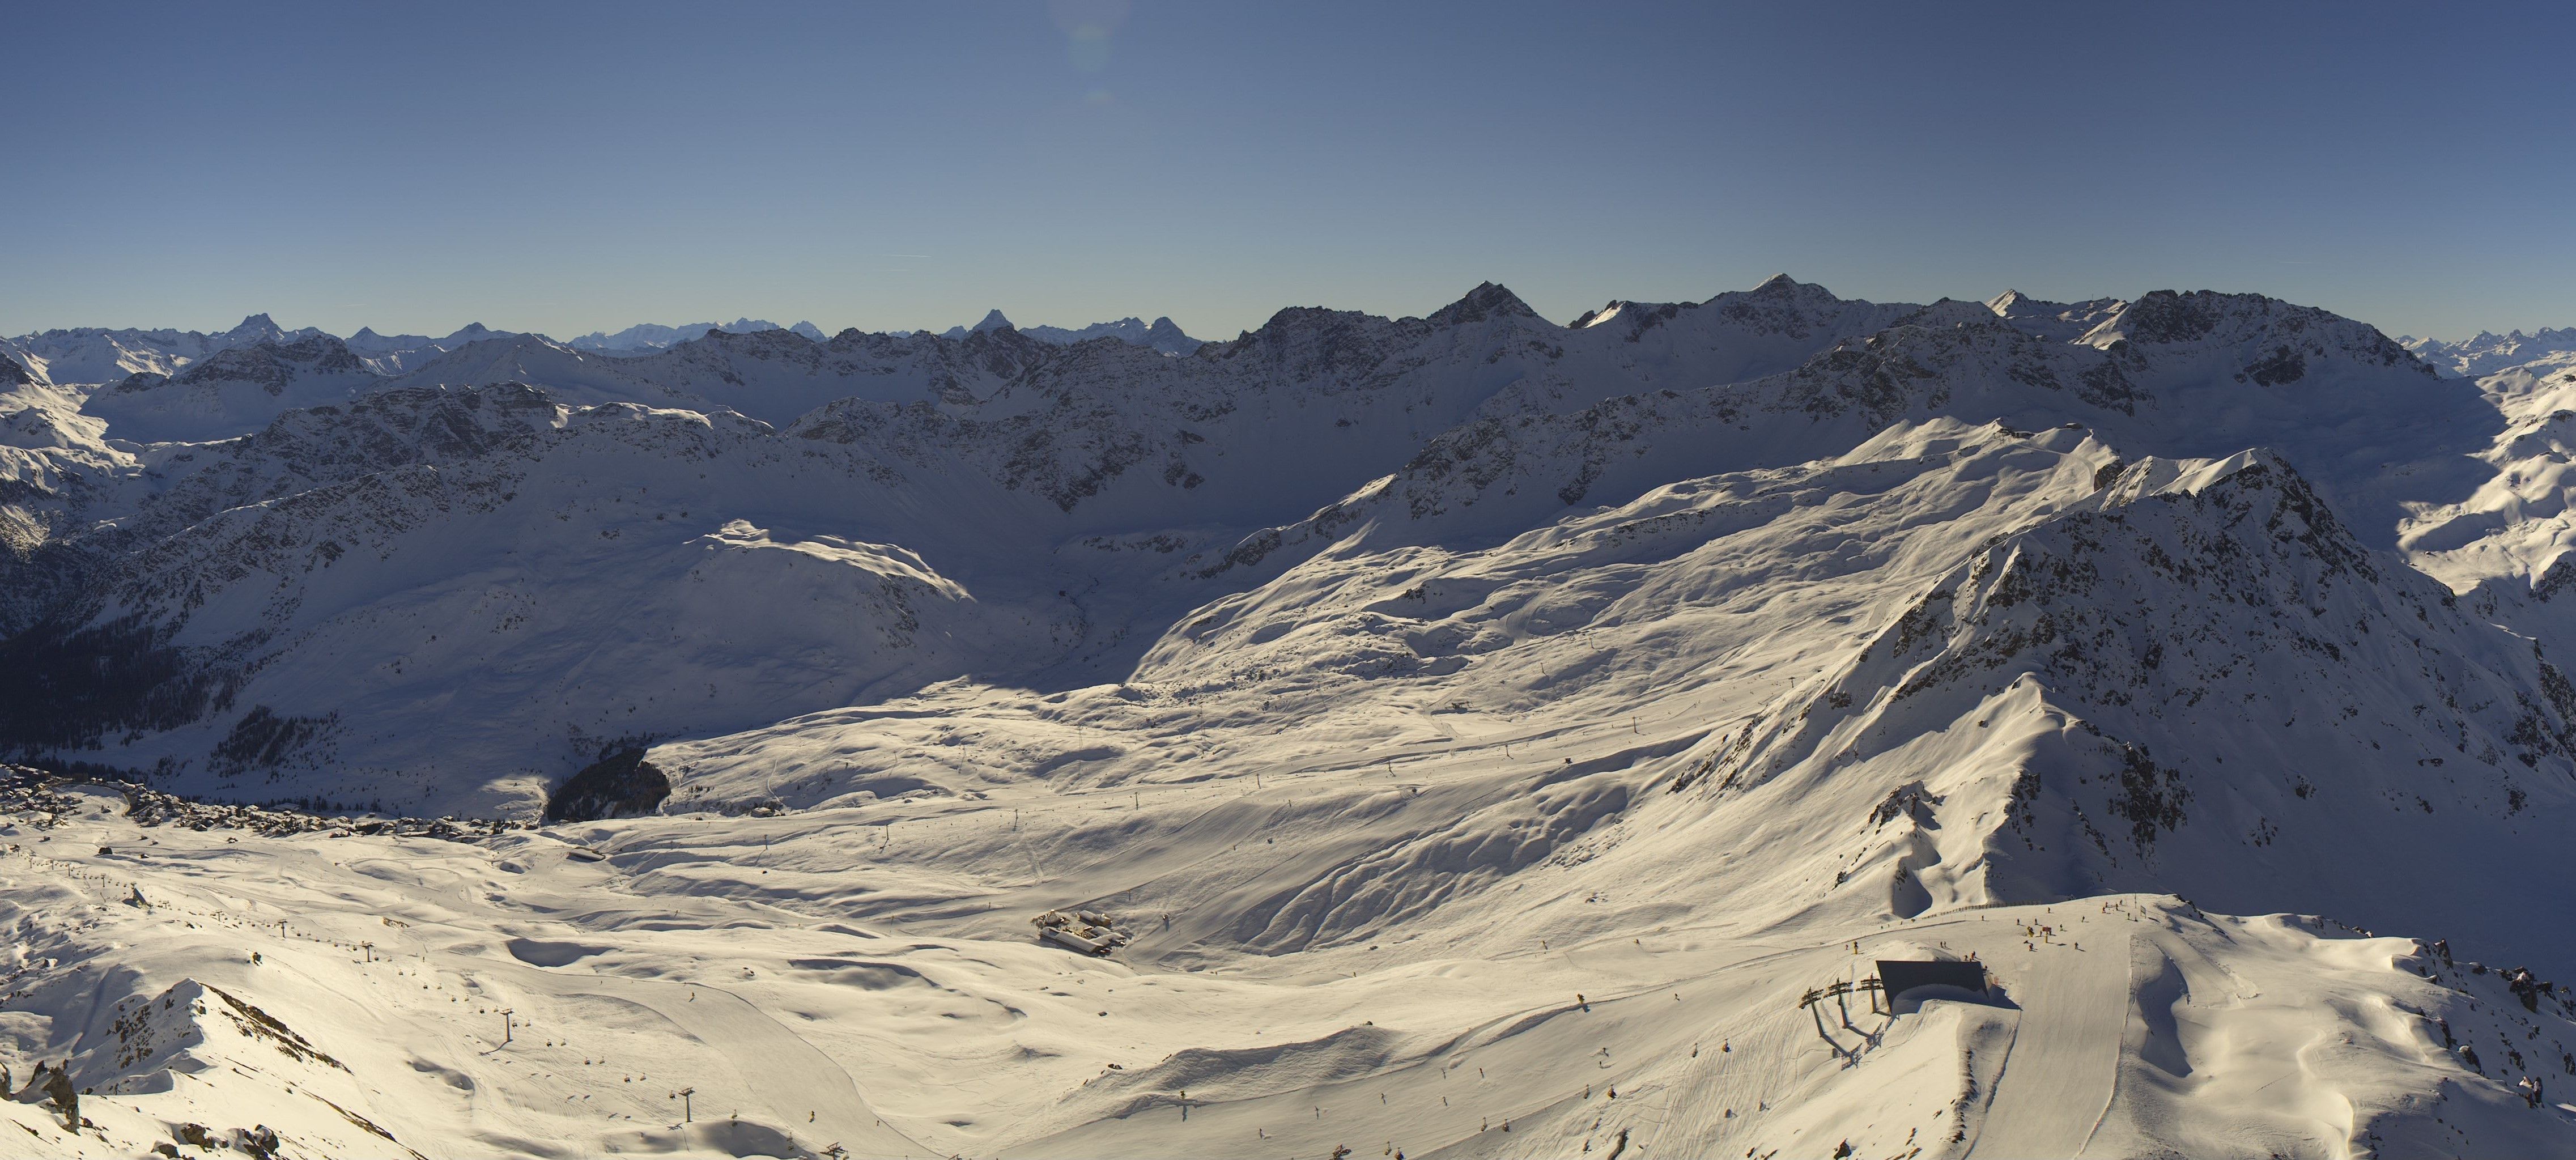 One more sunny day today, like here in Arosa (roundshot.com)